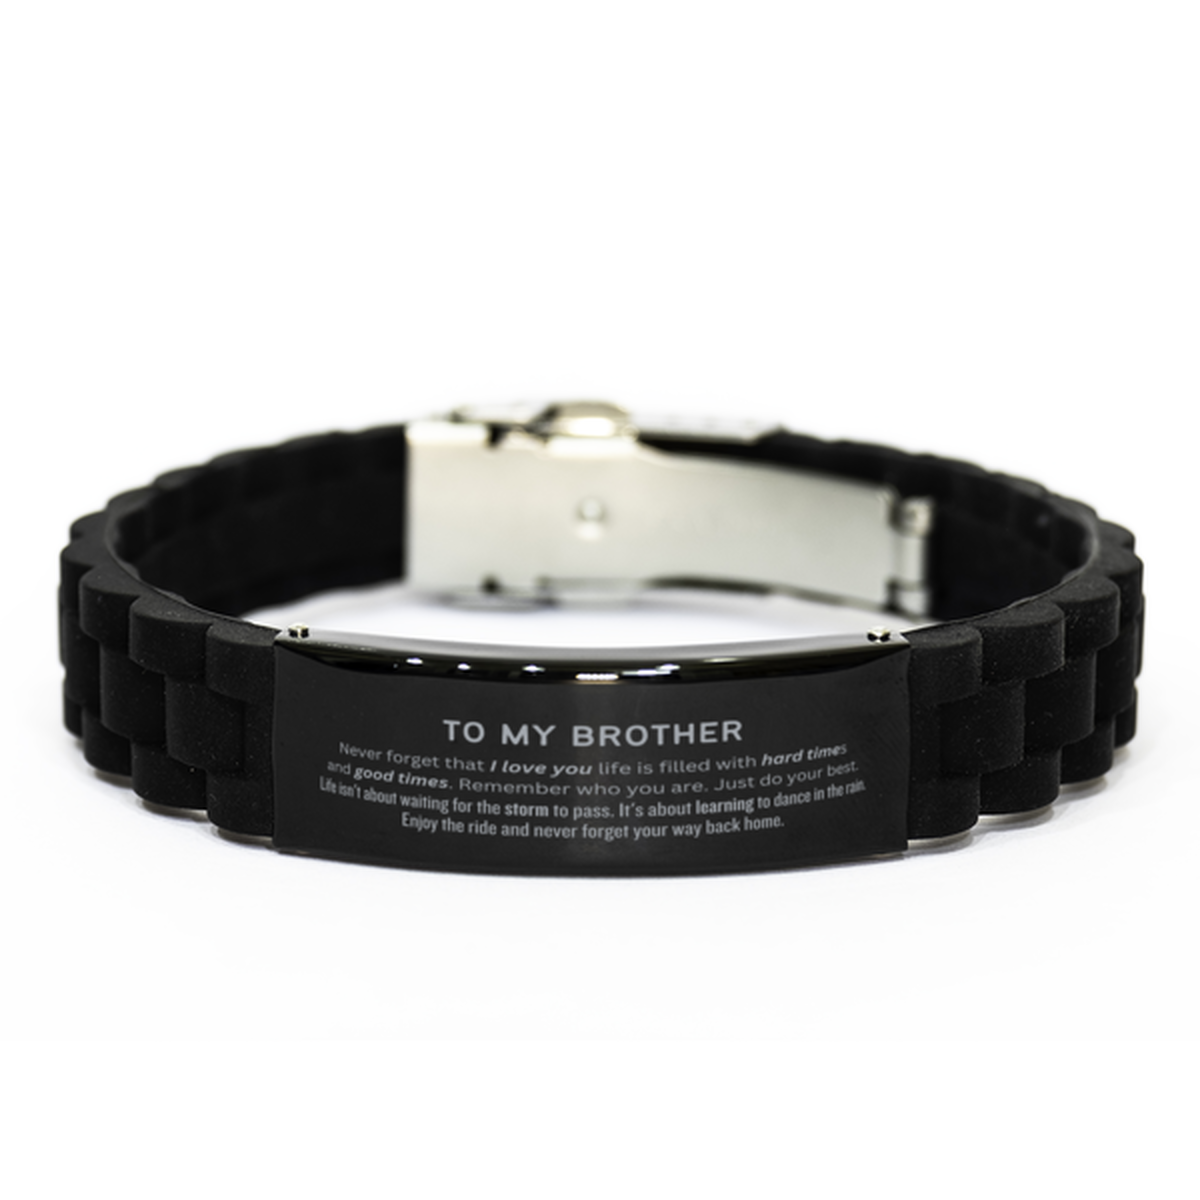 Christmas Brother Black Glidelock Clasp Bracelet Gifts, To My Brother Birthday Thank You Gifts For Brother, Graduation Unique Gifts For Brother To My Brother Never forget that I love you life is filled with hard times and good times. Remember who you are.